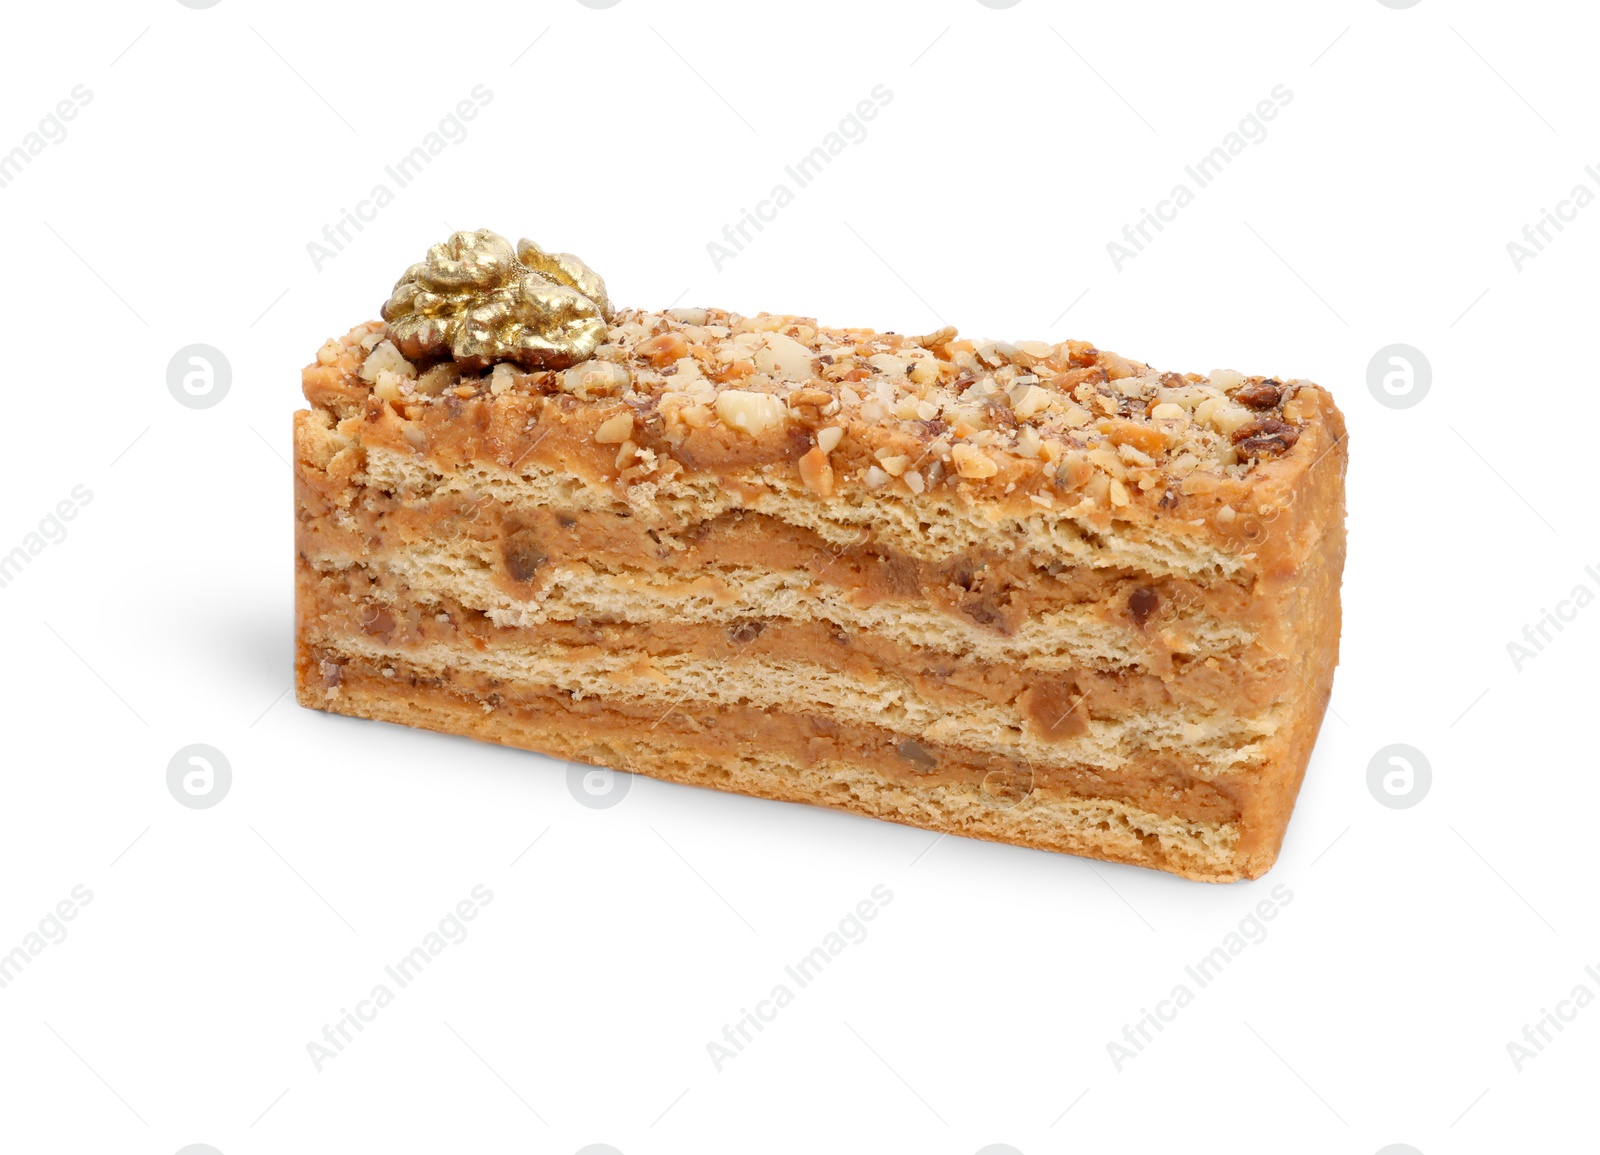 Photo of Piece of delicious layered honey cake isolated on white